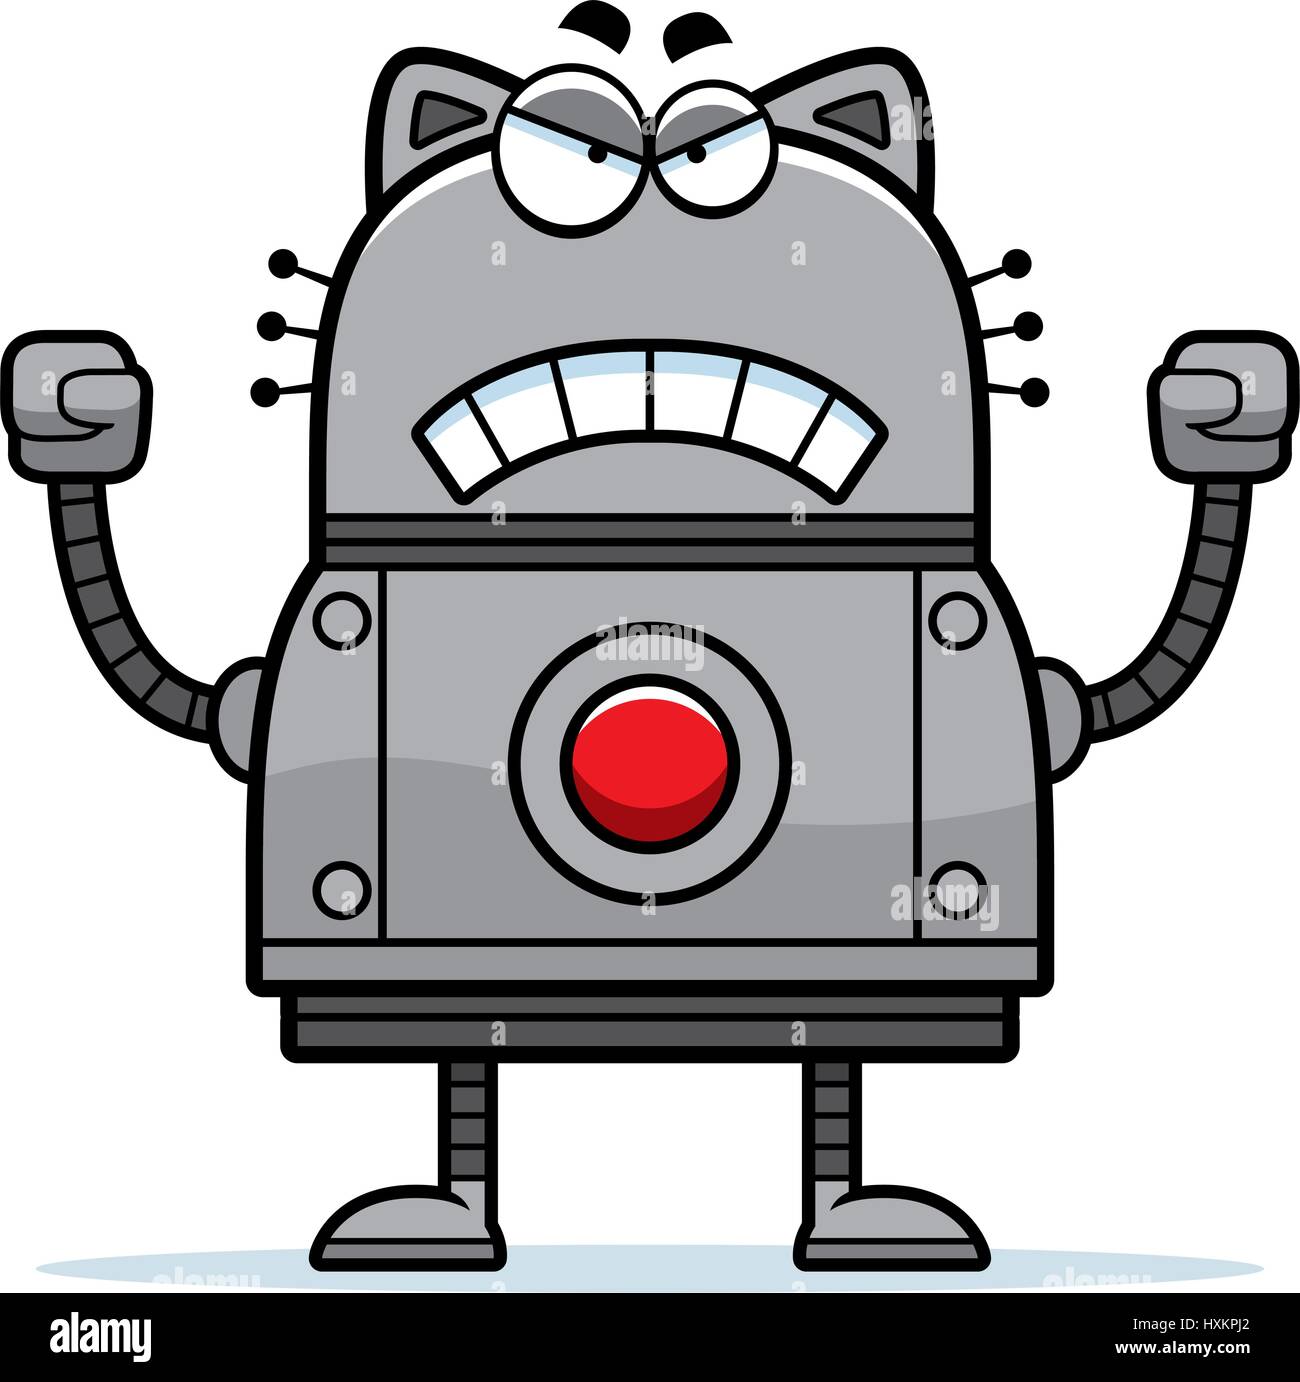 A cartoon illustration of a robot cat looking angry. Stock Vector